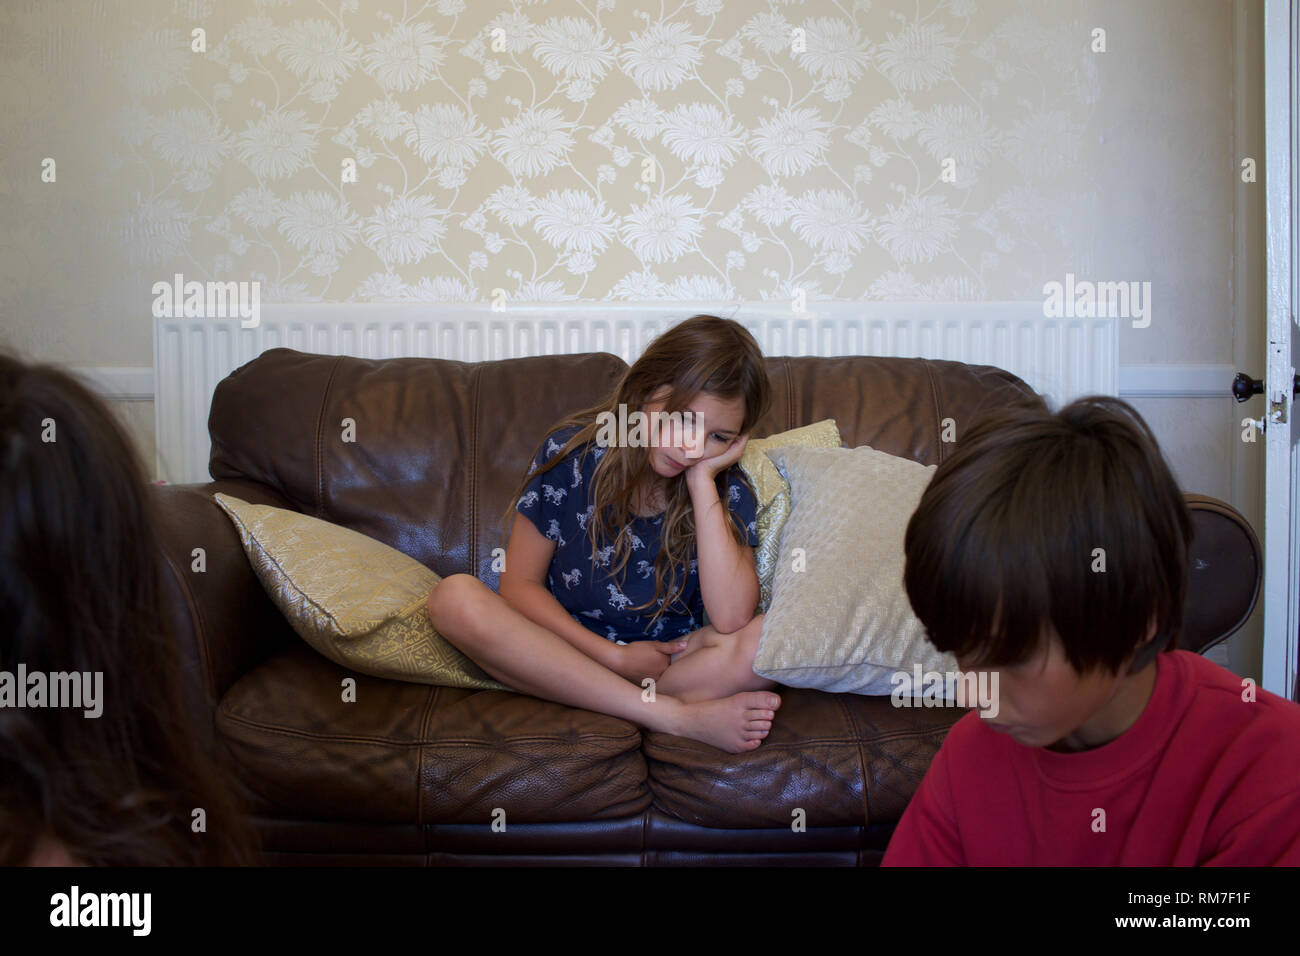 Bored looking child sits cross-legged on sofa, with older child(ren) in foreground. Rugby, England Stock Photo